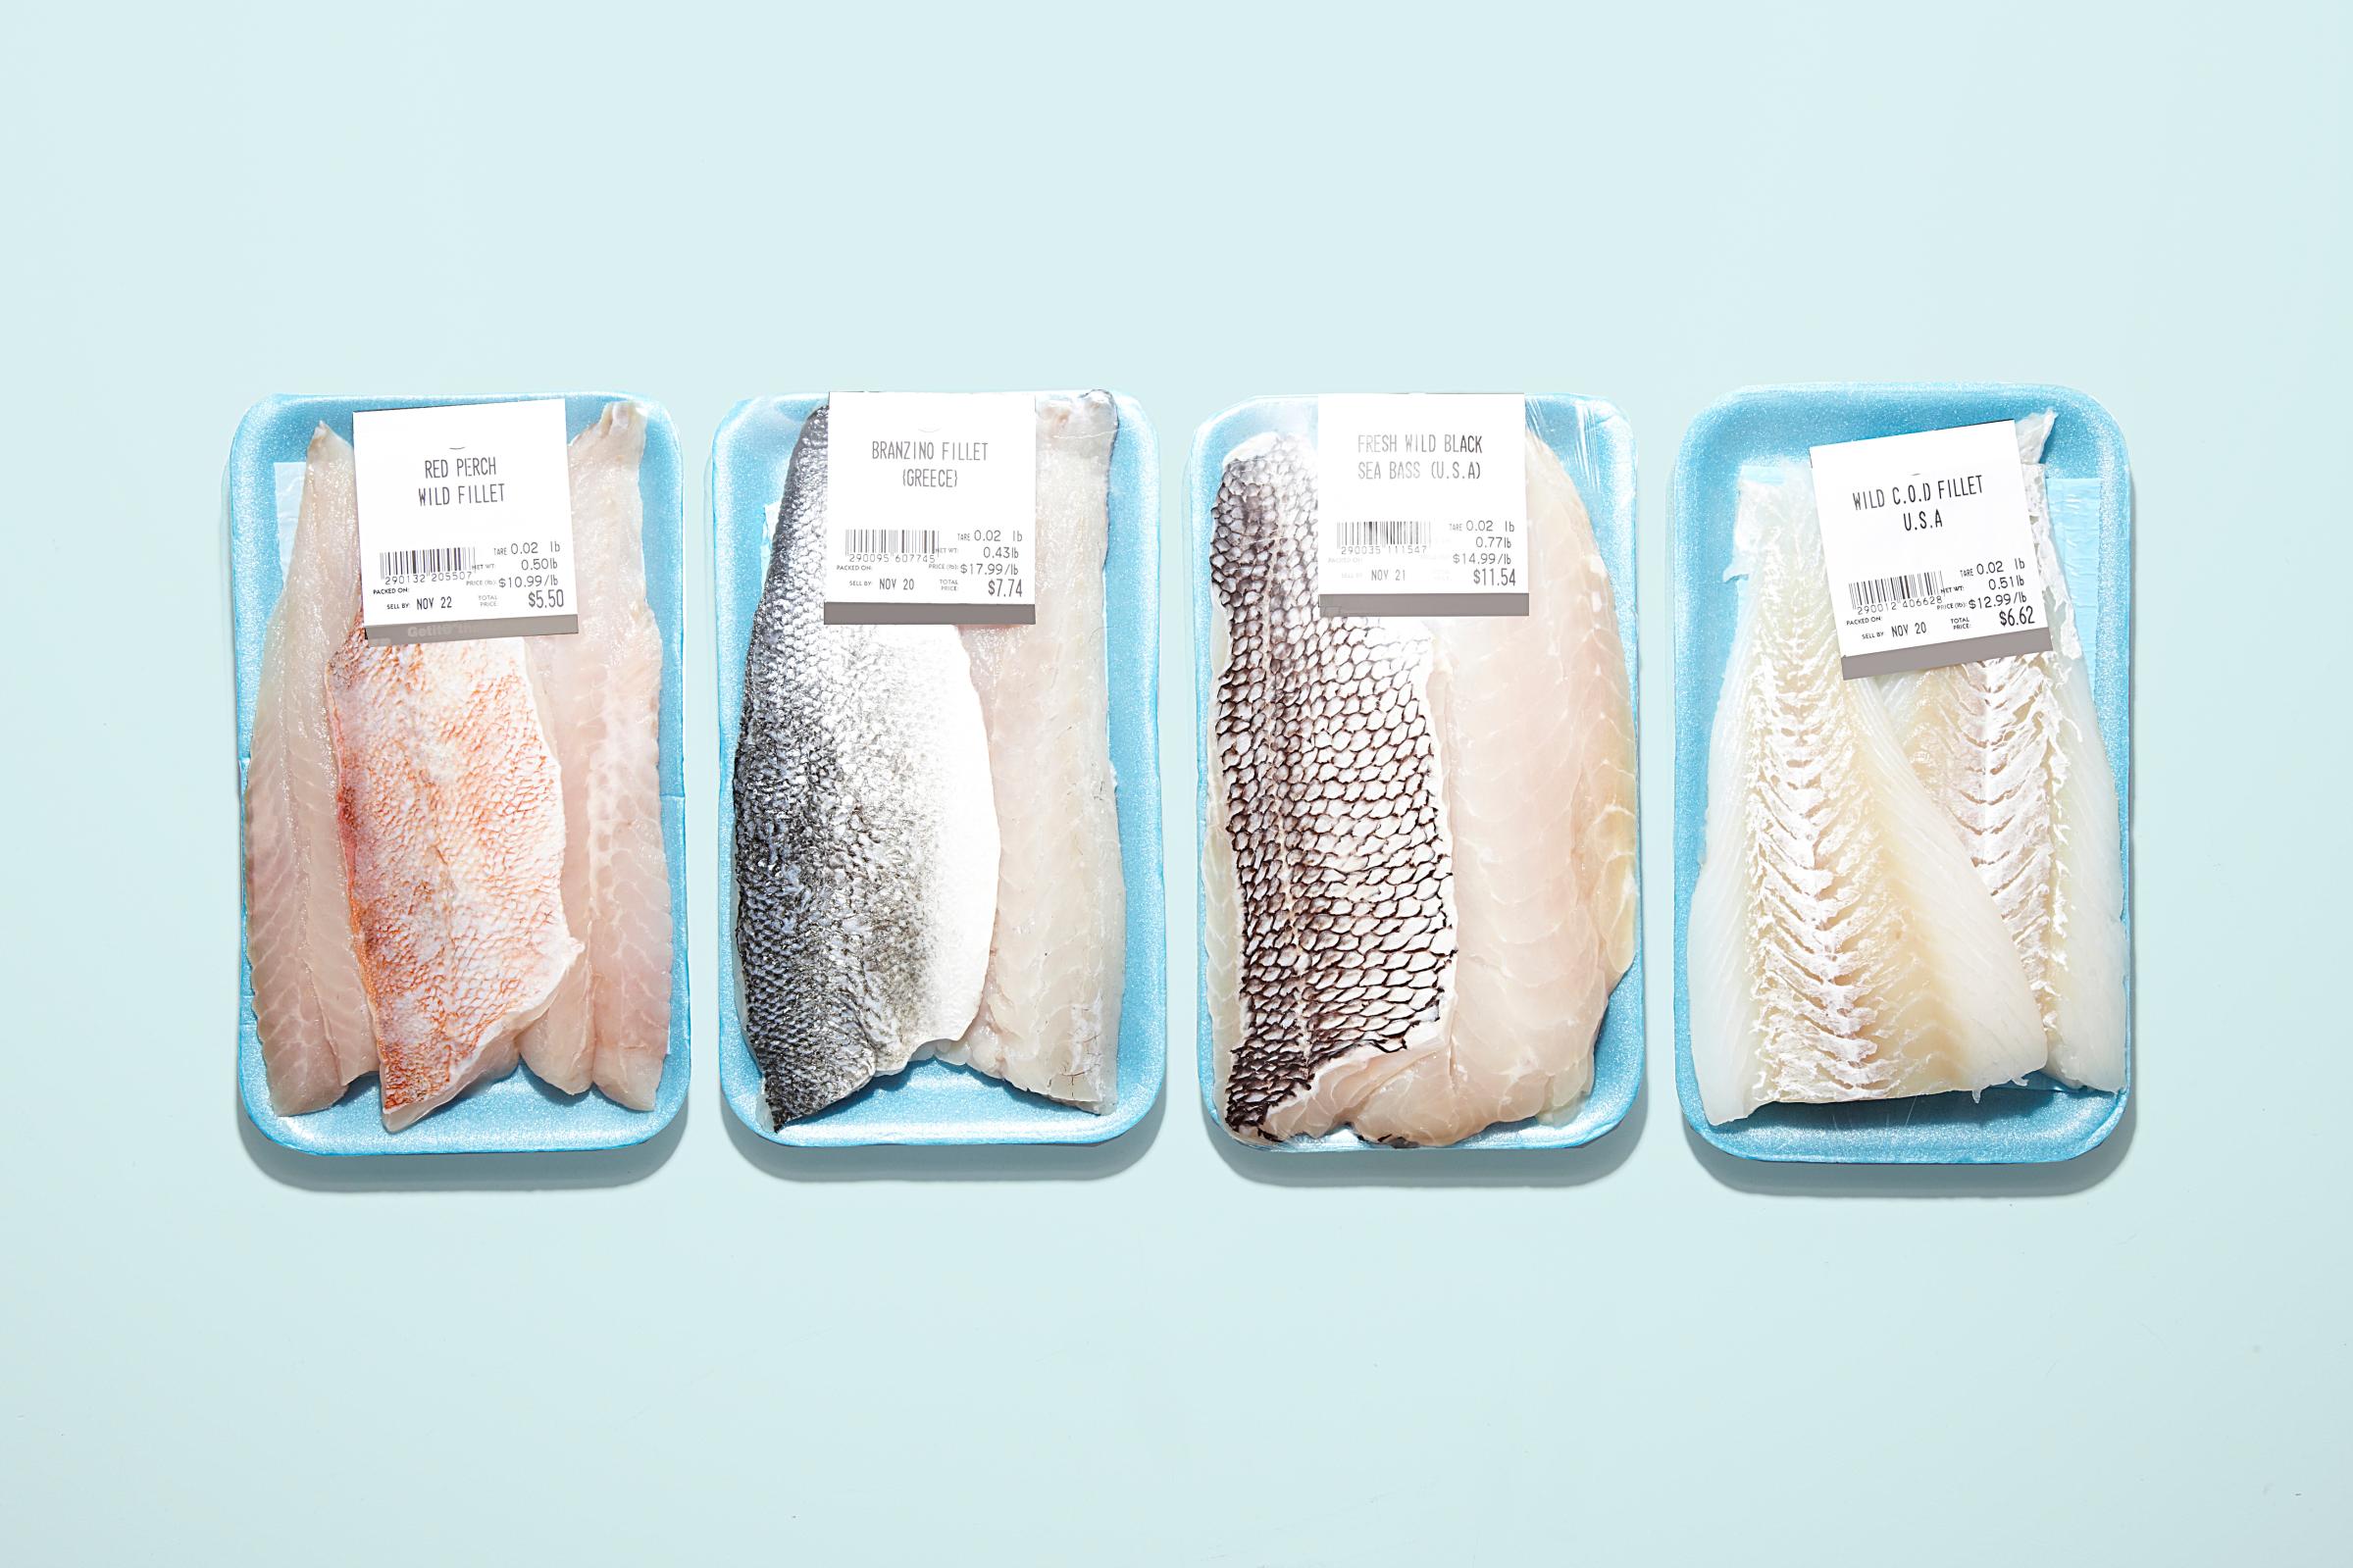 Packaged Fresh Fish TIME health stock